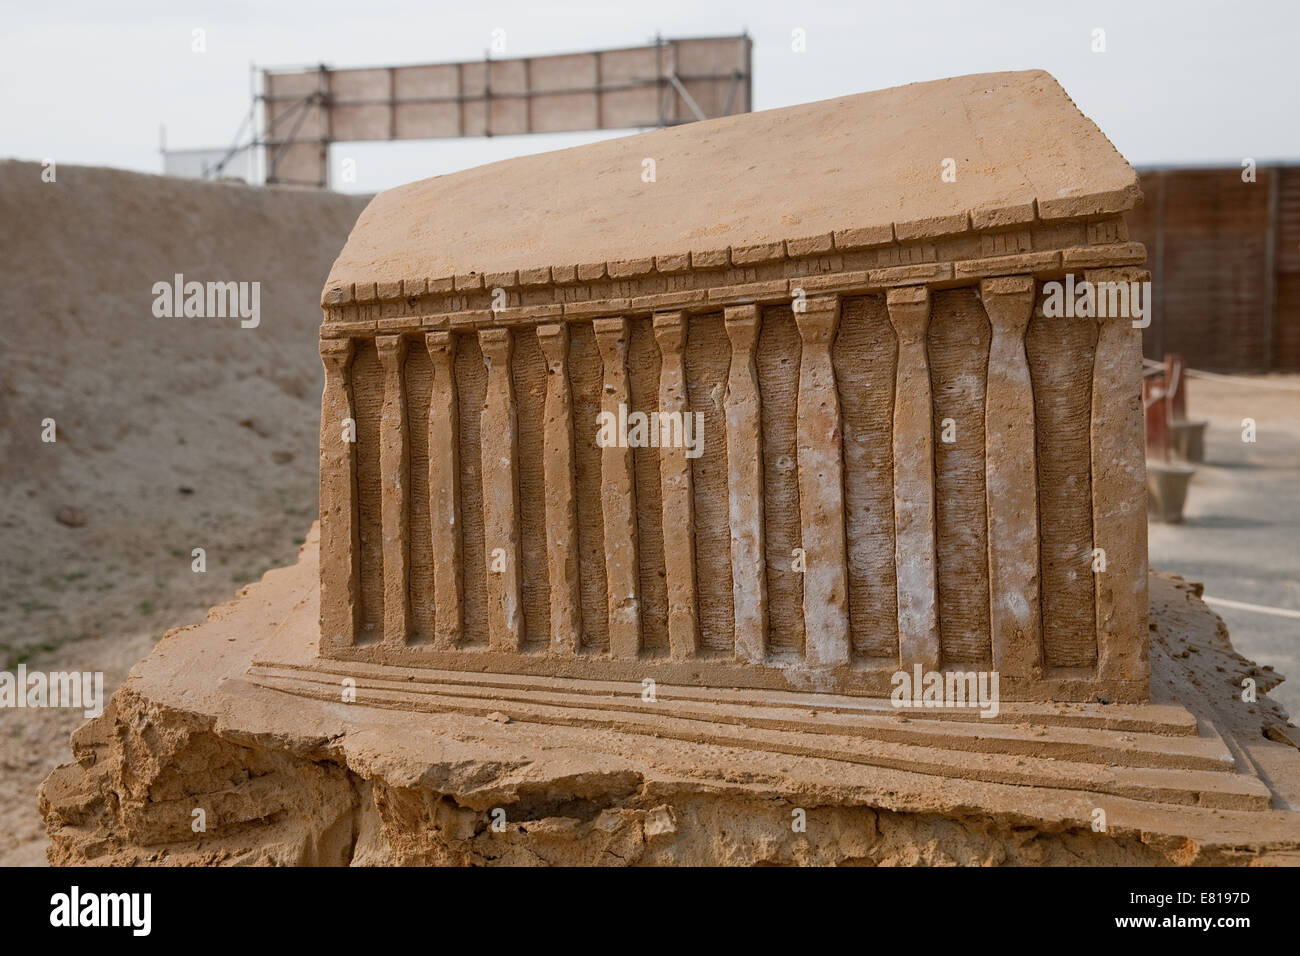 The Parthenon in Greece on display at the Sand Sculpture festival in Brighton Stock Photo